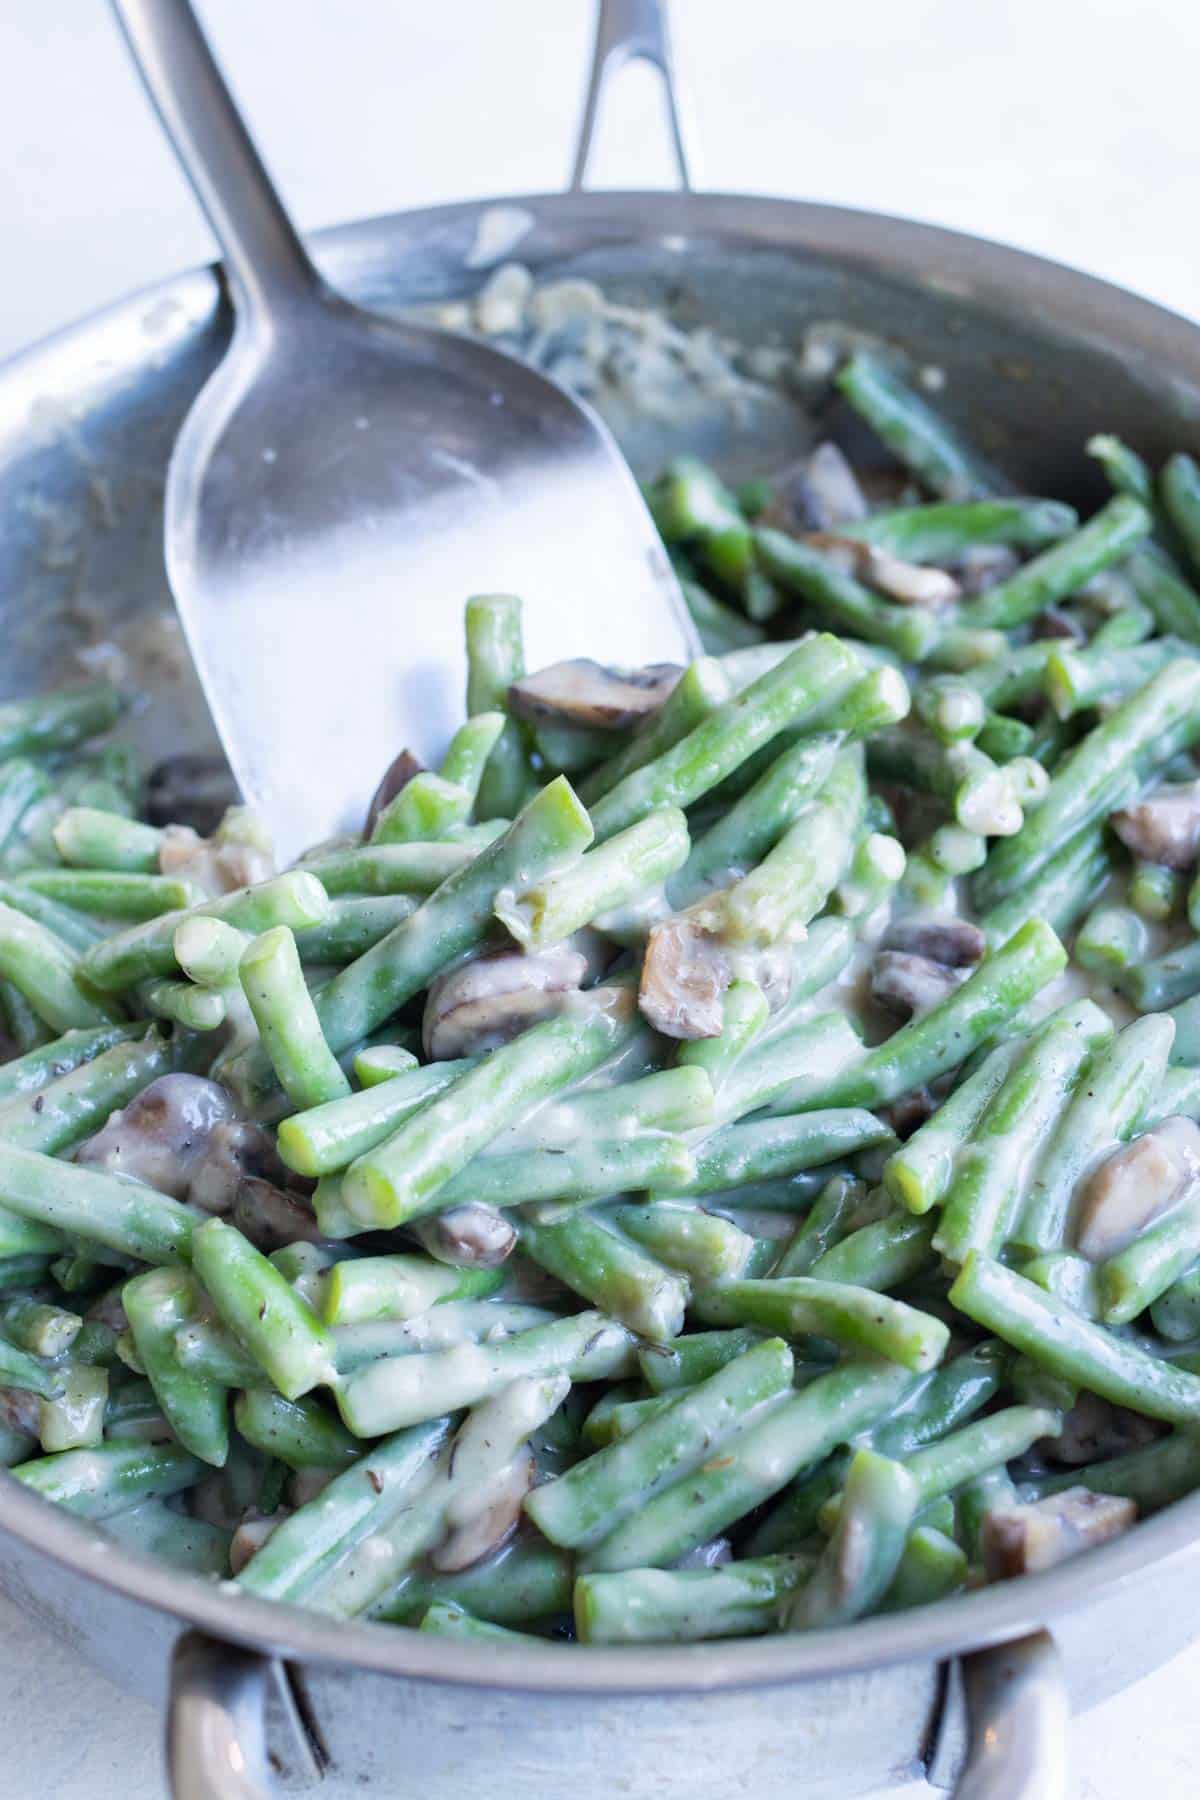 Green beans are added to a skillet with cream of mushroom soup.